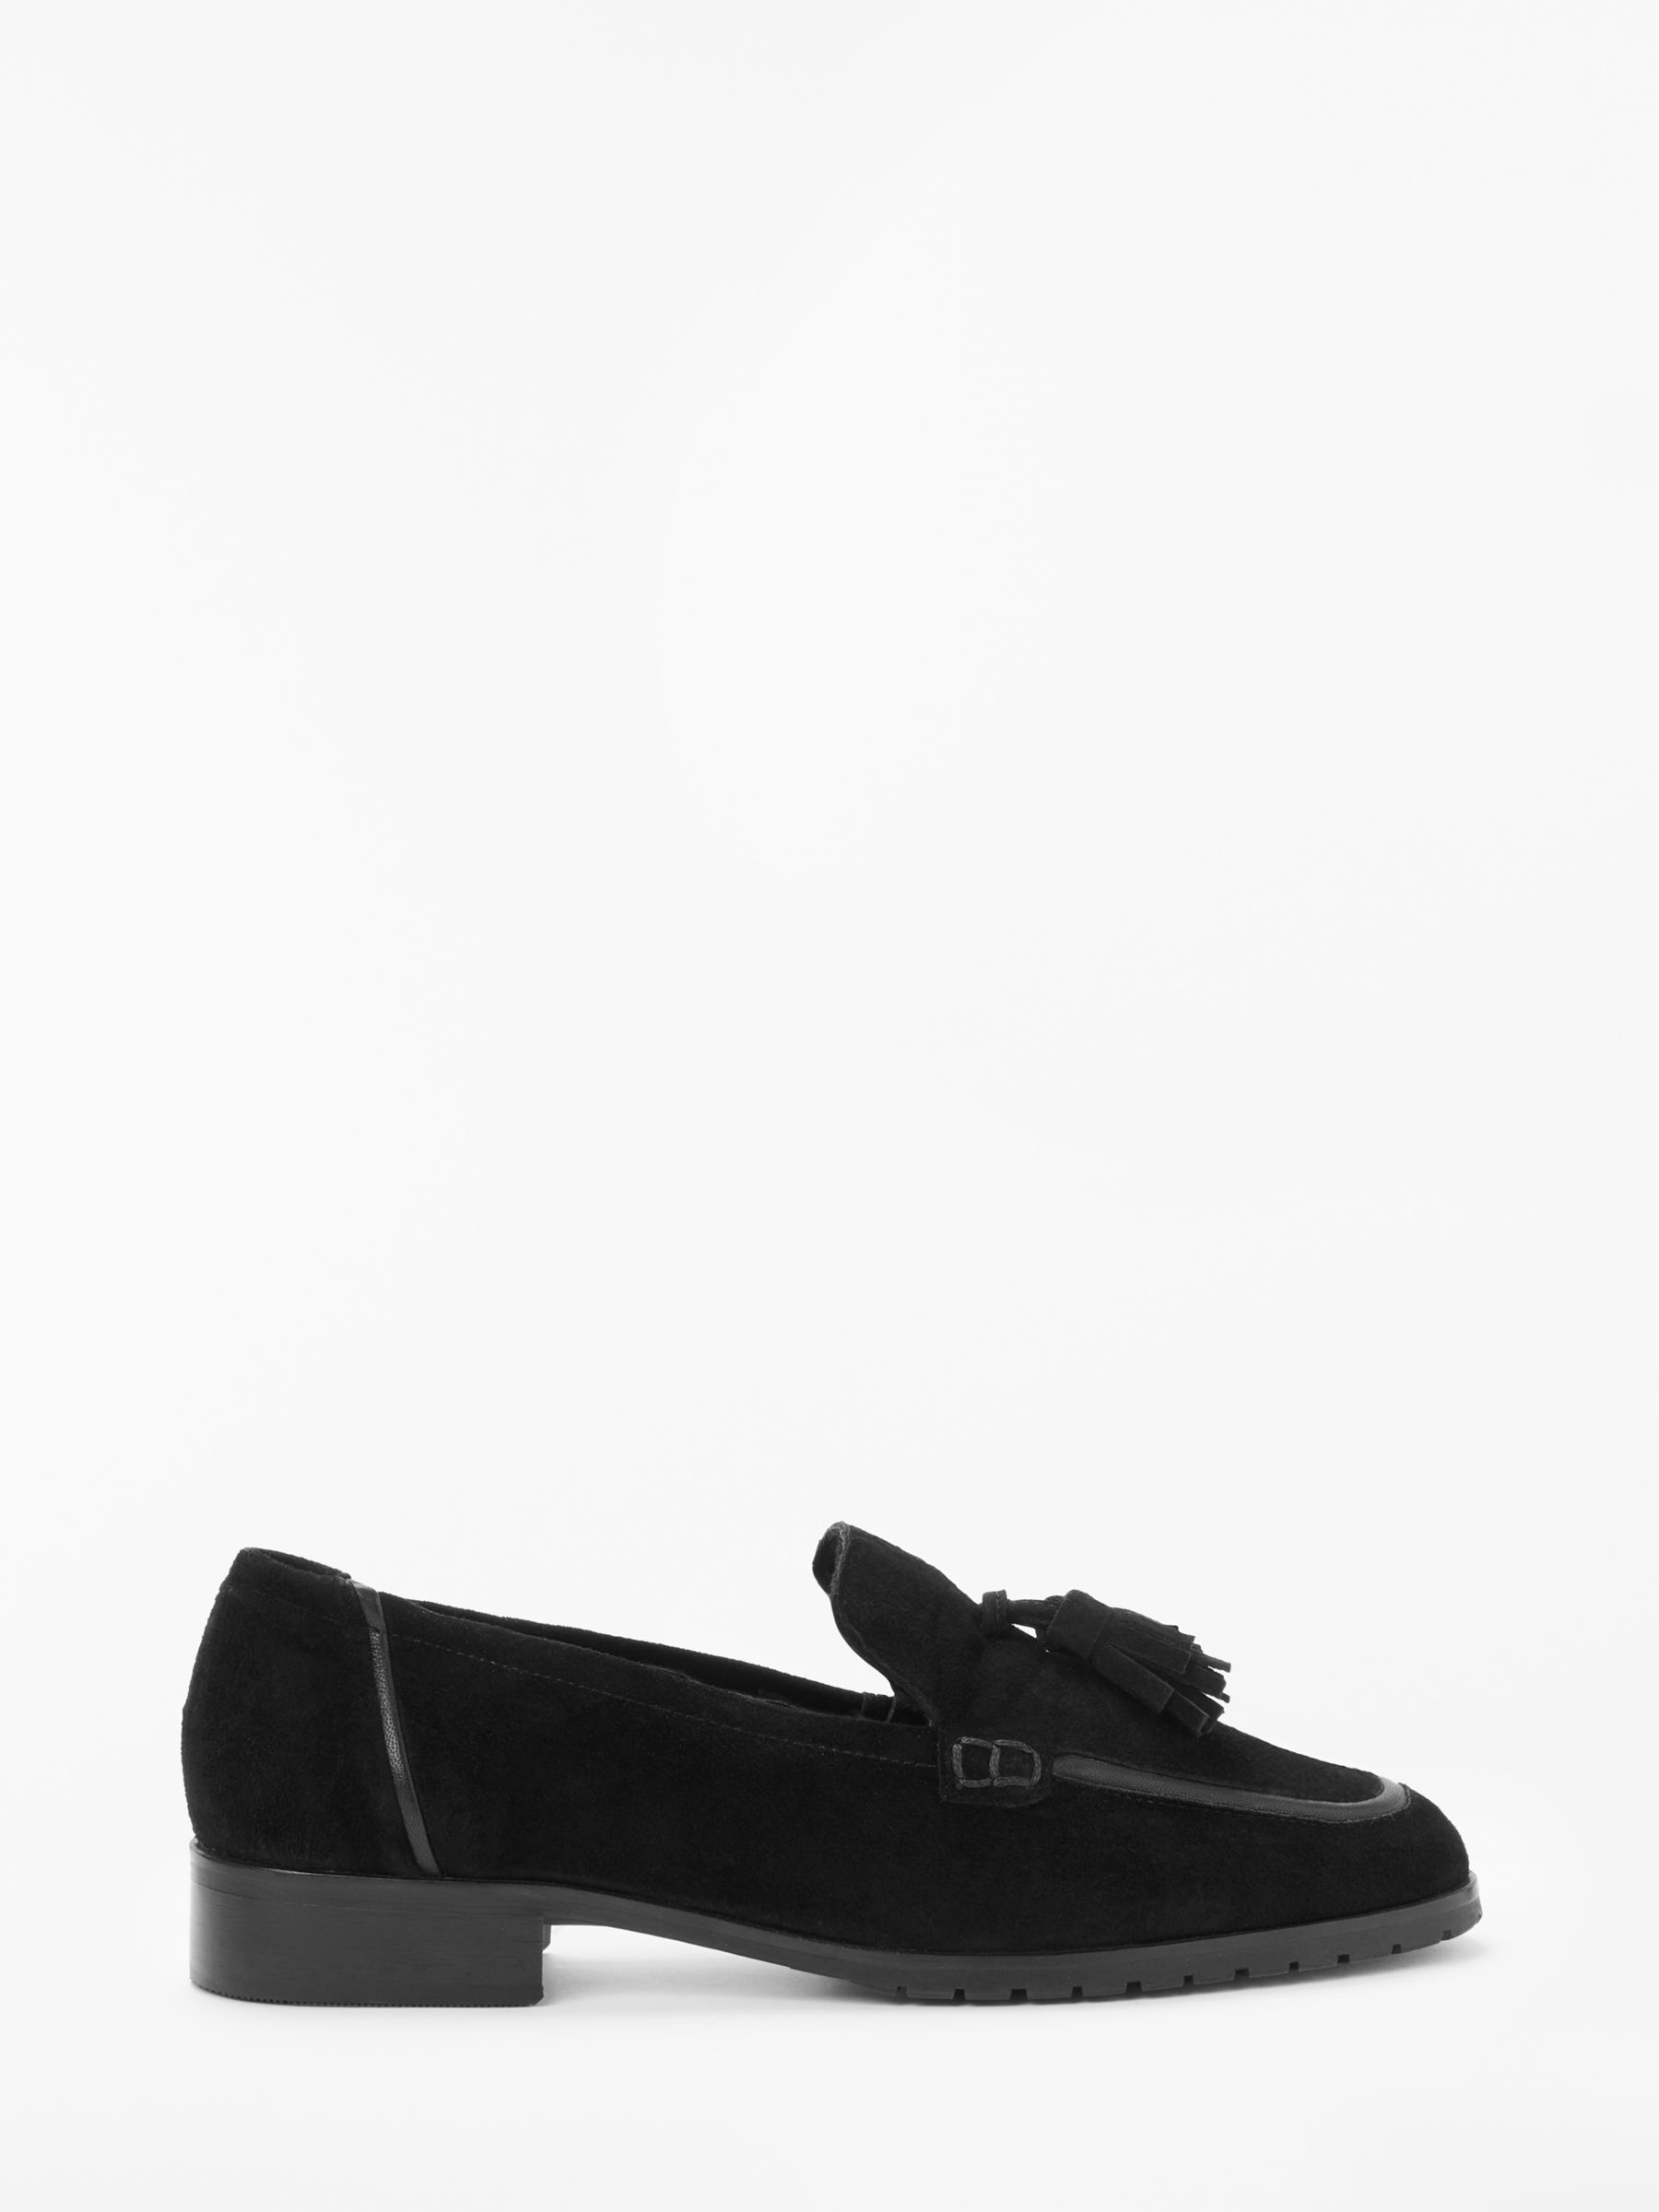 Boden Aria Shearling Lined Loafers, Black at John Lewis & Partners